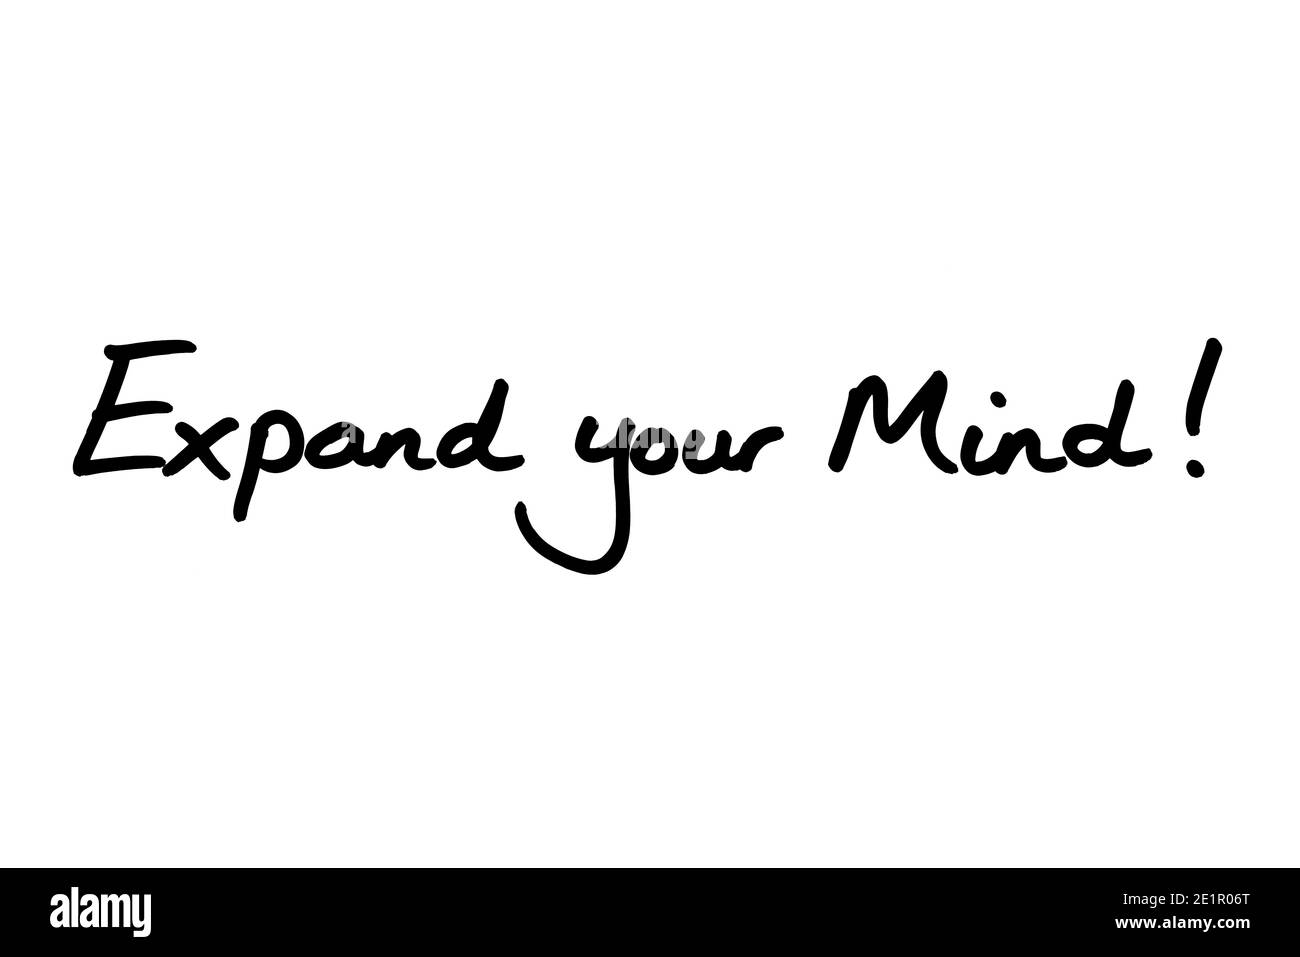 Expand your Mind! handwritten on a white background. Stock Photo